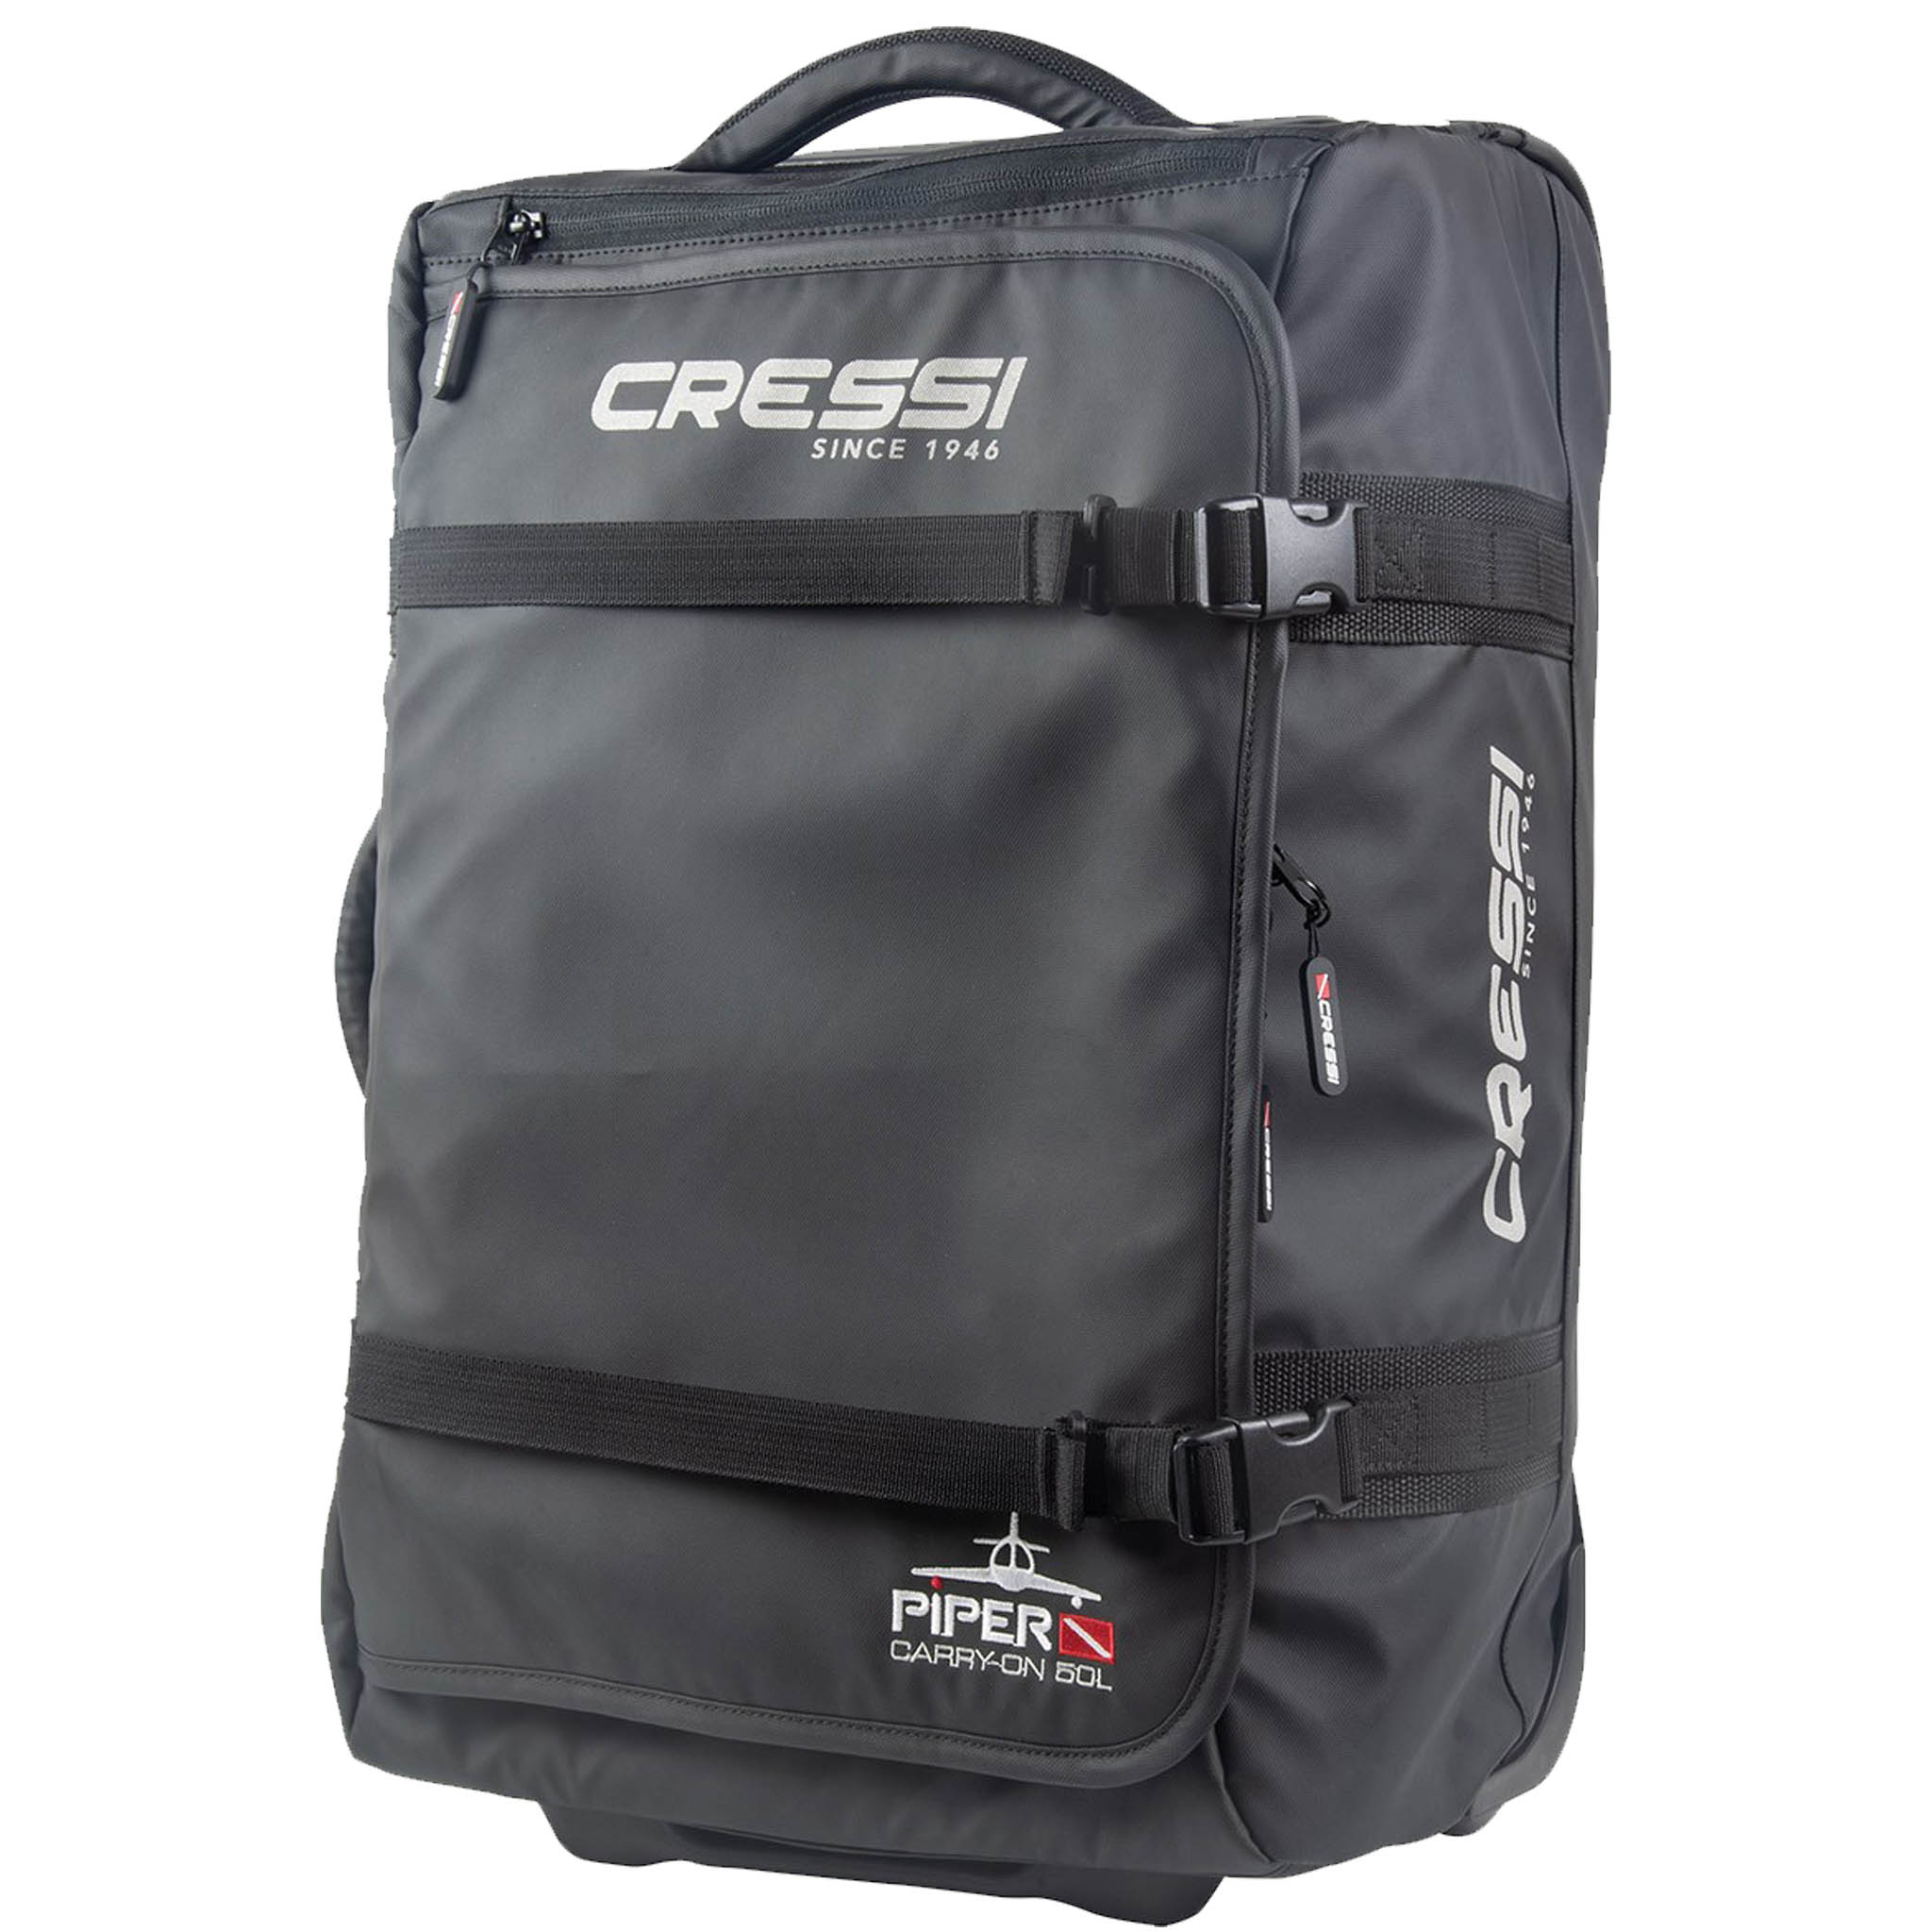 Piper Ultralight Carry-On Wheeled Bag